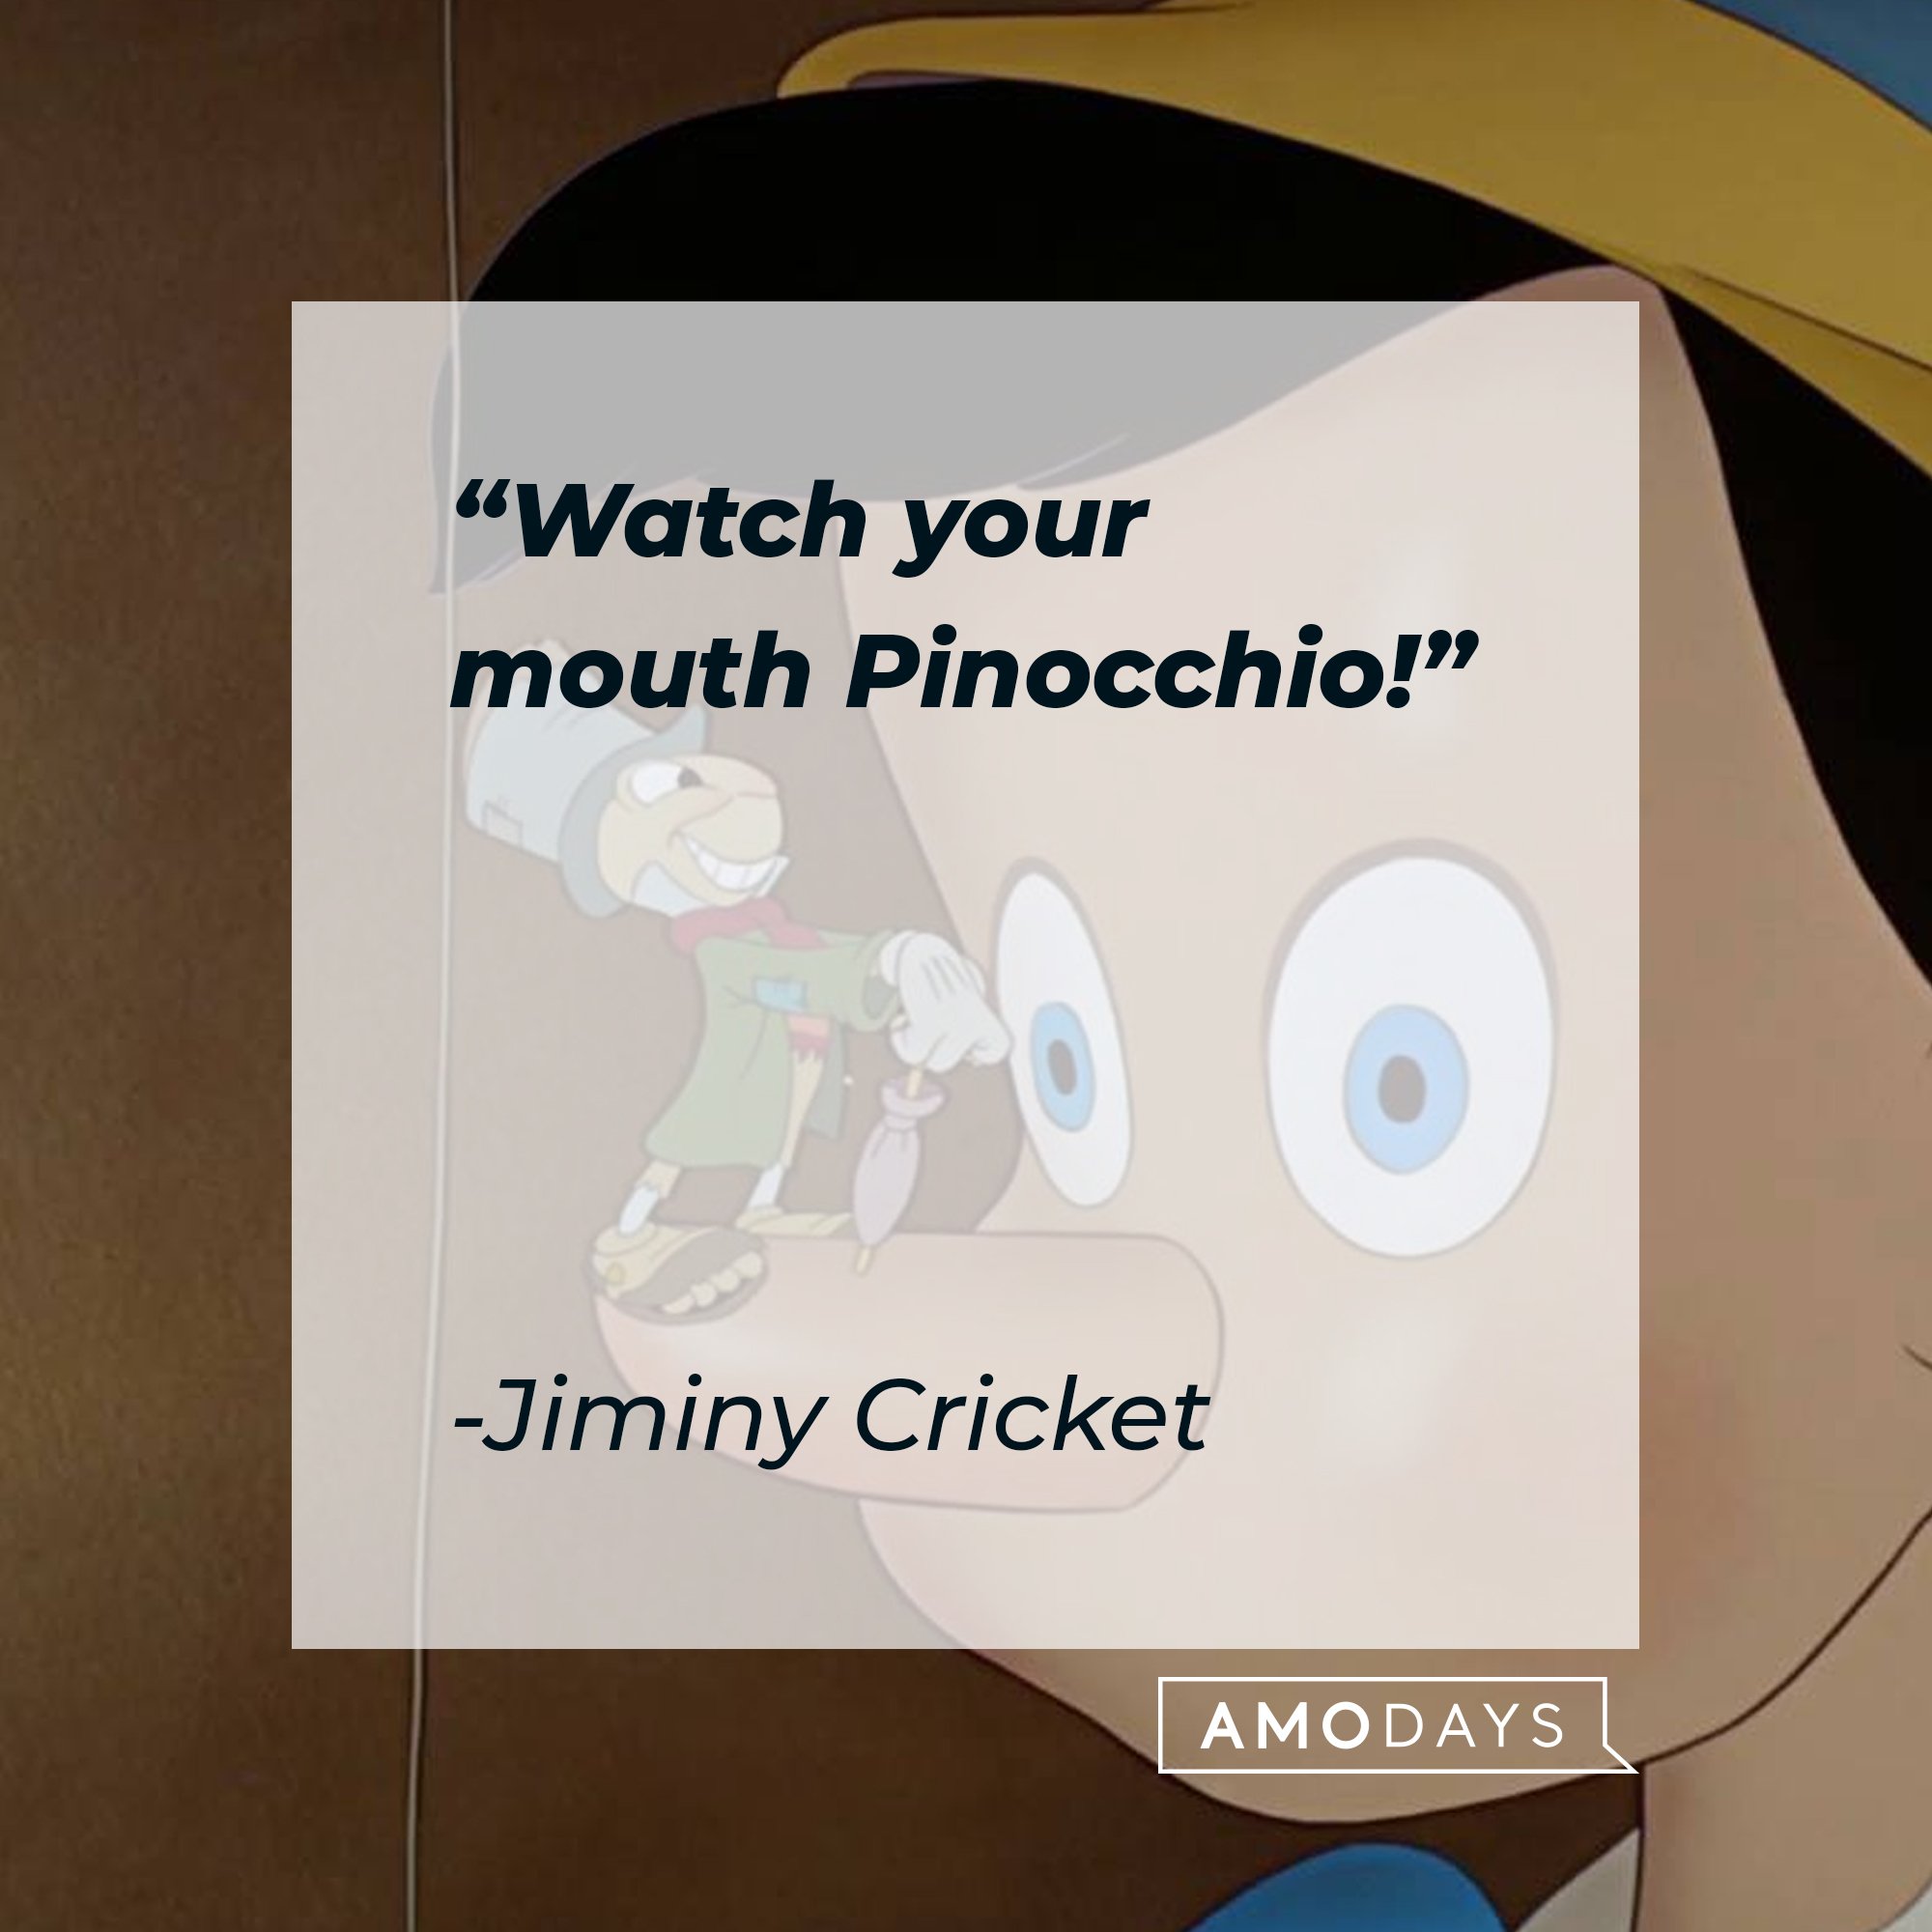  Jiminy Cricket's quote: "Watch your mouth Pinocchio!" | Image: AmoDays